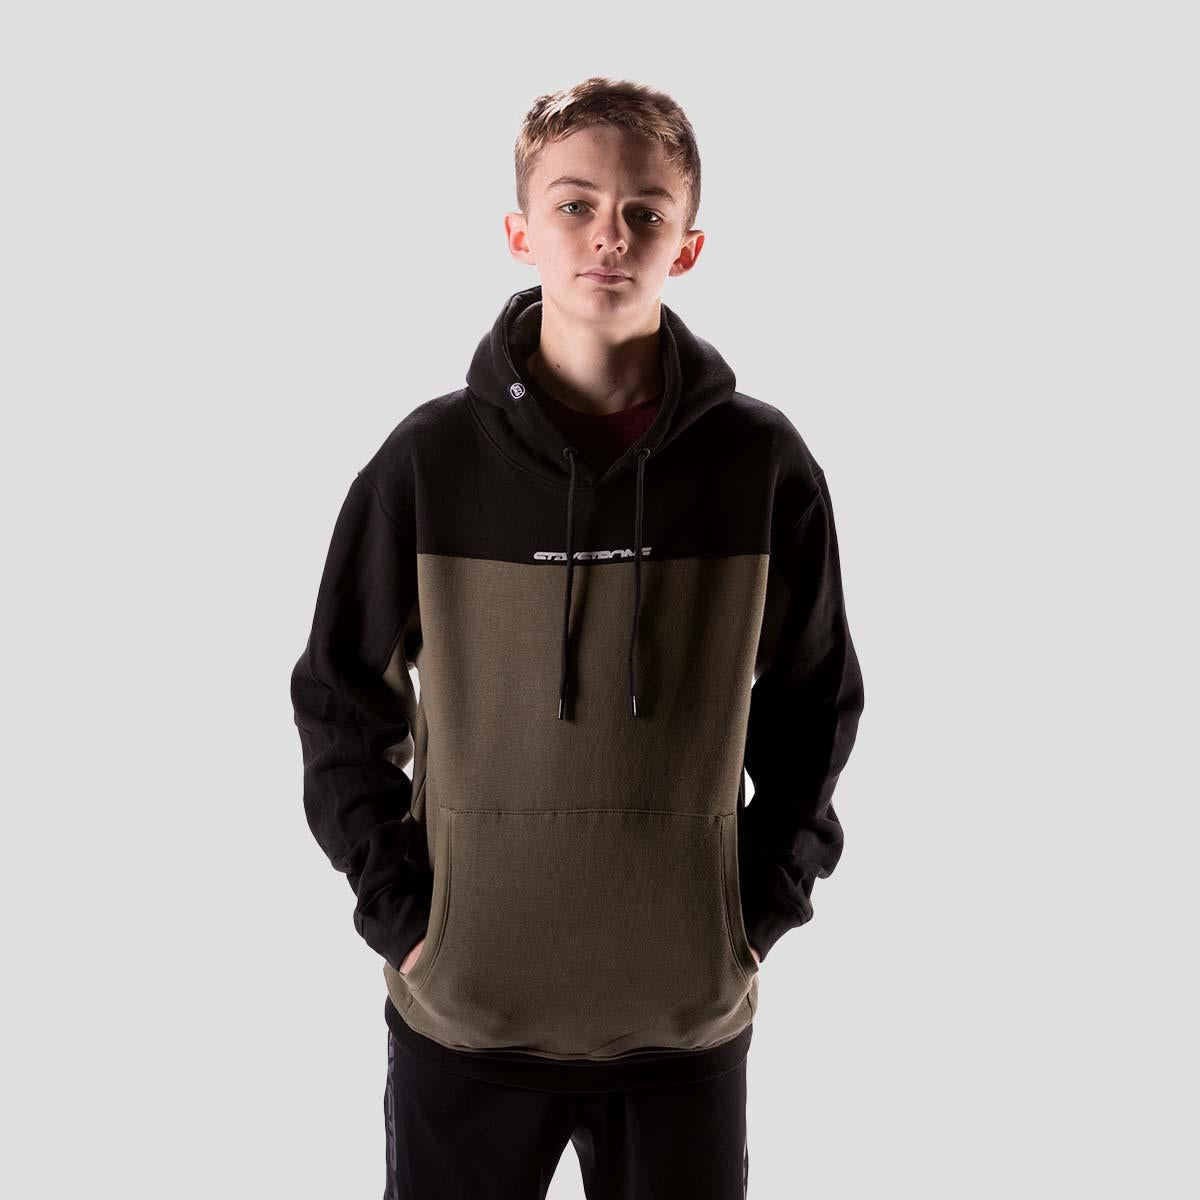 Stay Strong Cut Off Hoodie - Black/Olive